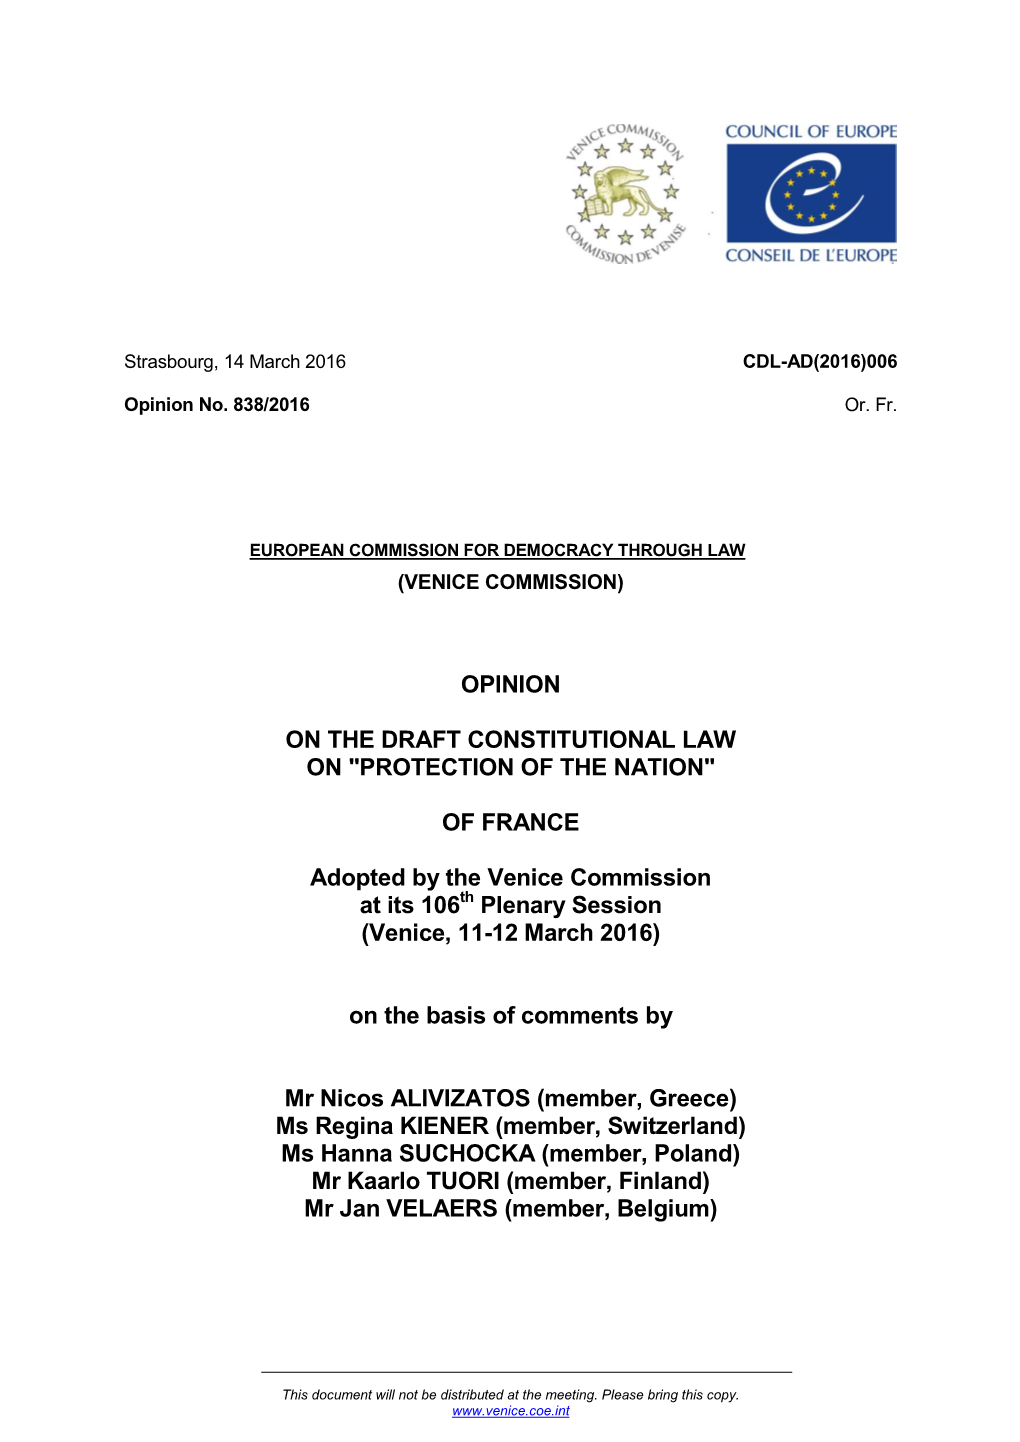 Draft Constitutional Law “On Protection of the Nation” of France